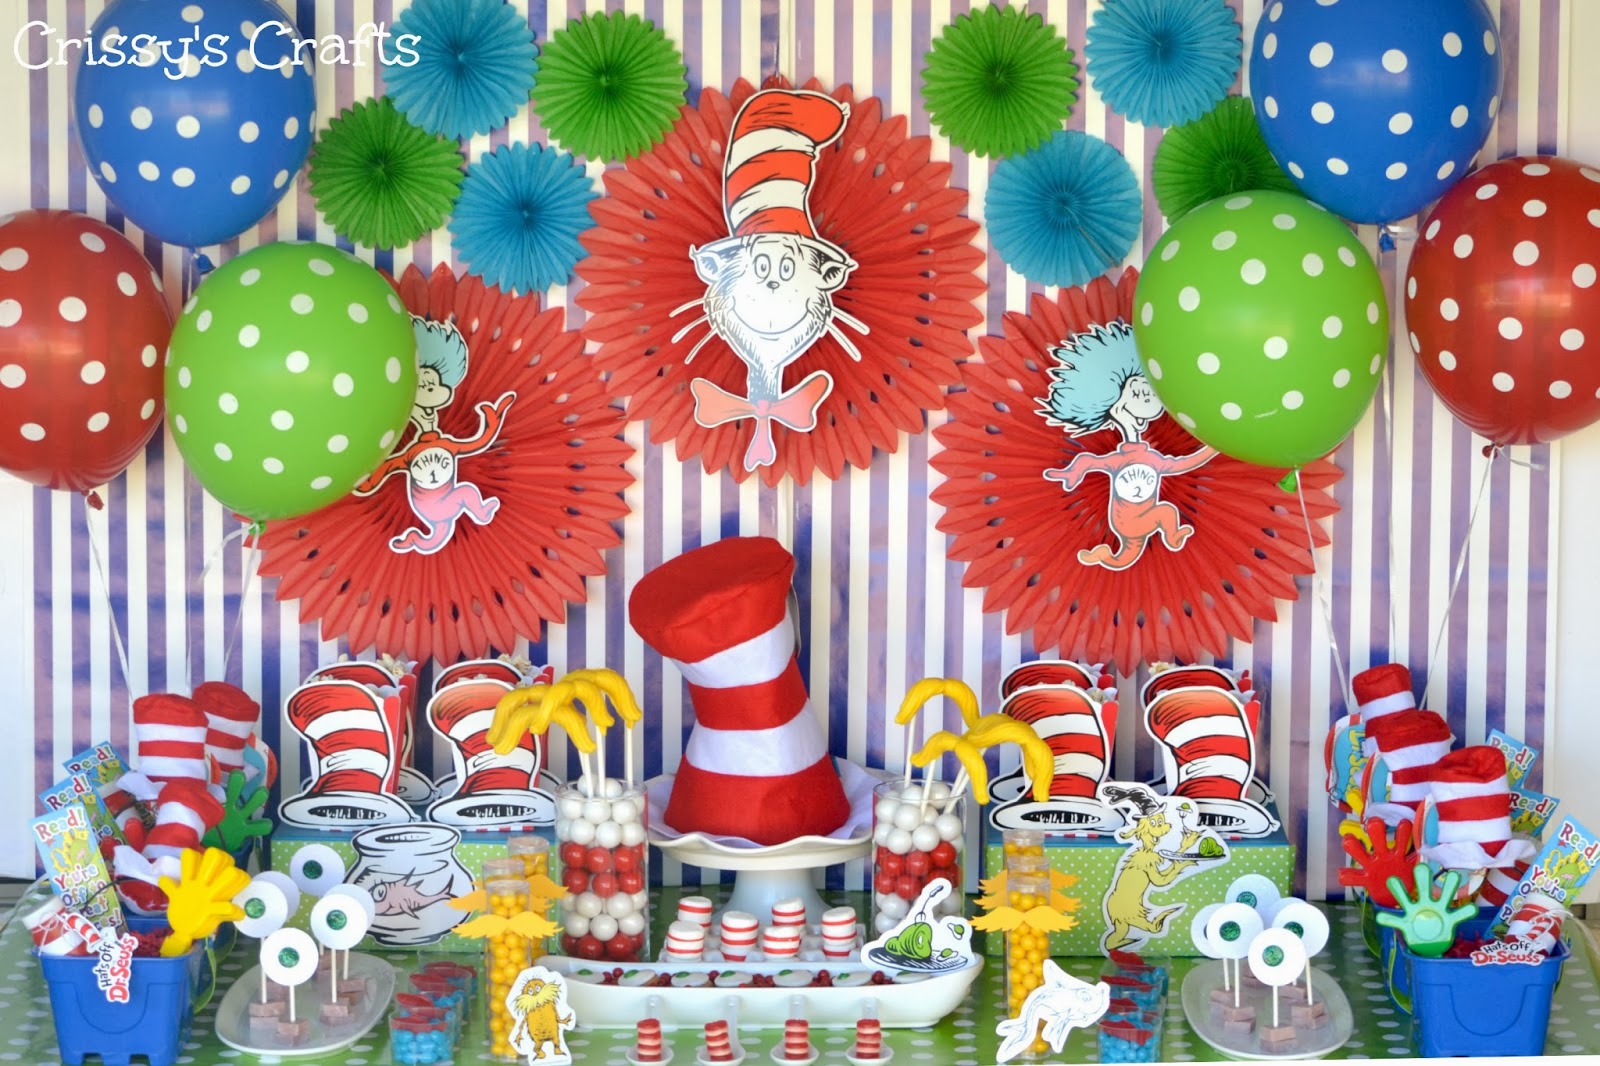 Crissy's Crafts: Dr. Seuss Party Ideas and Snacks